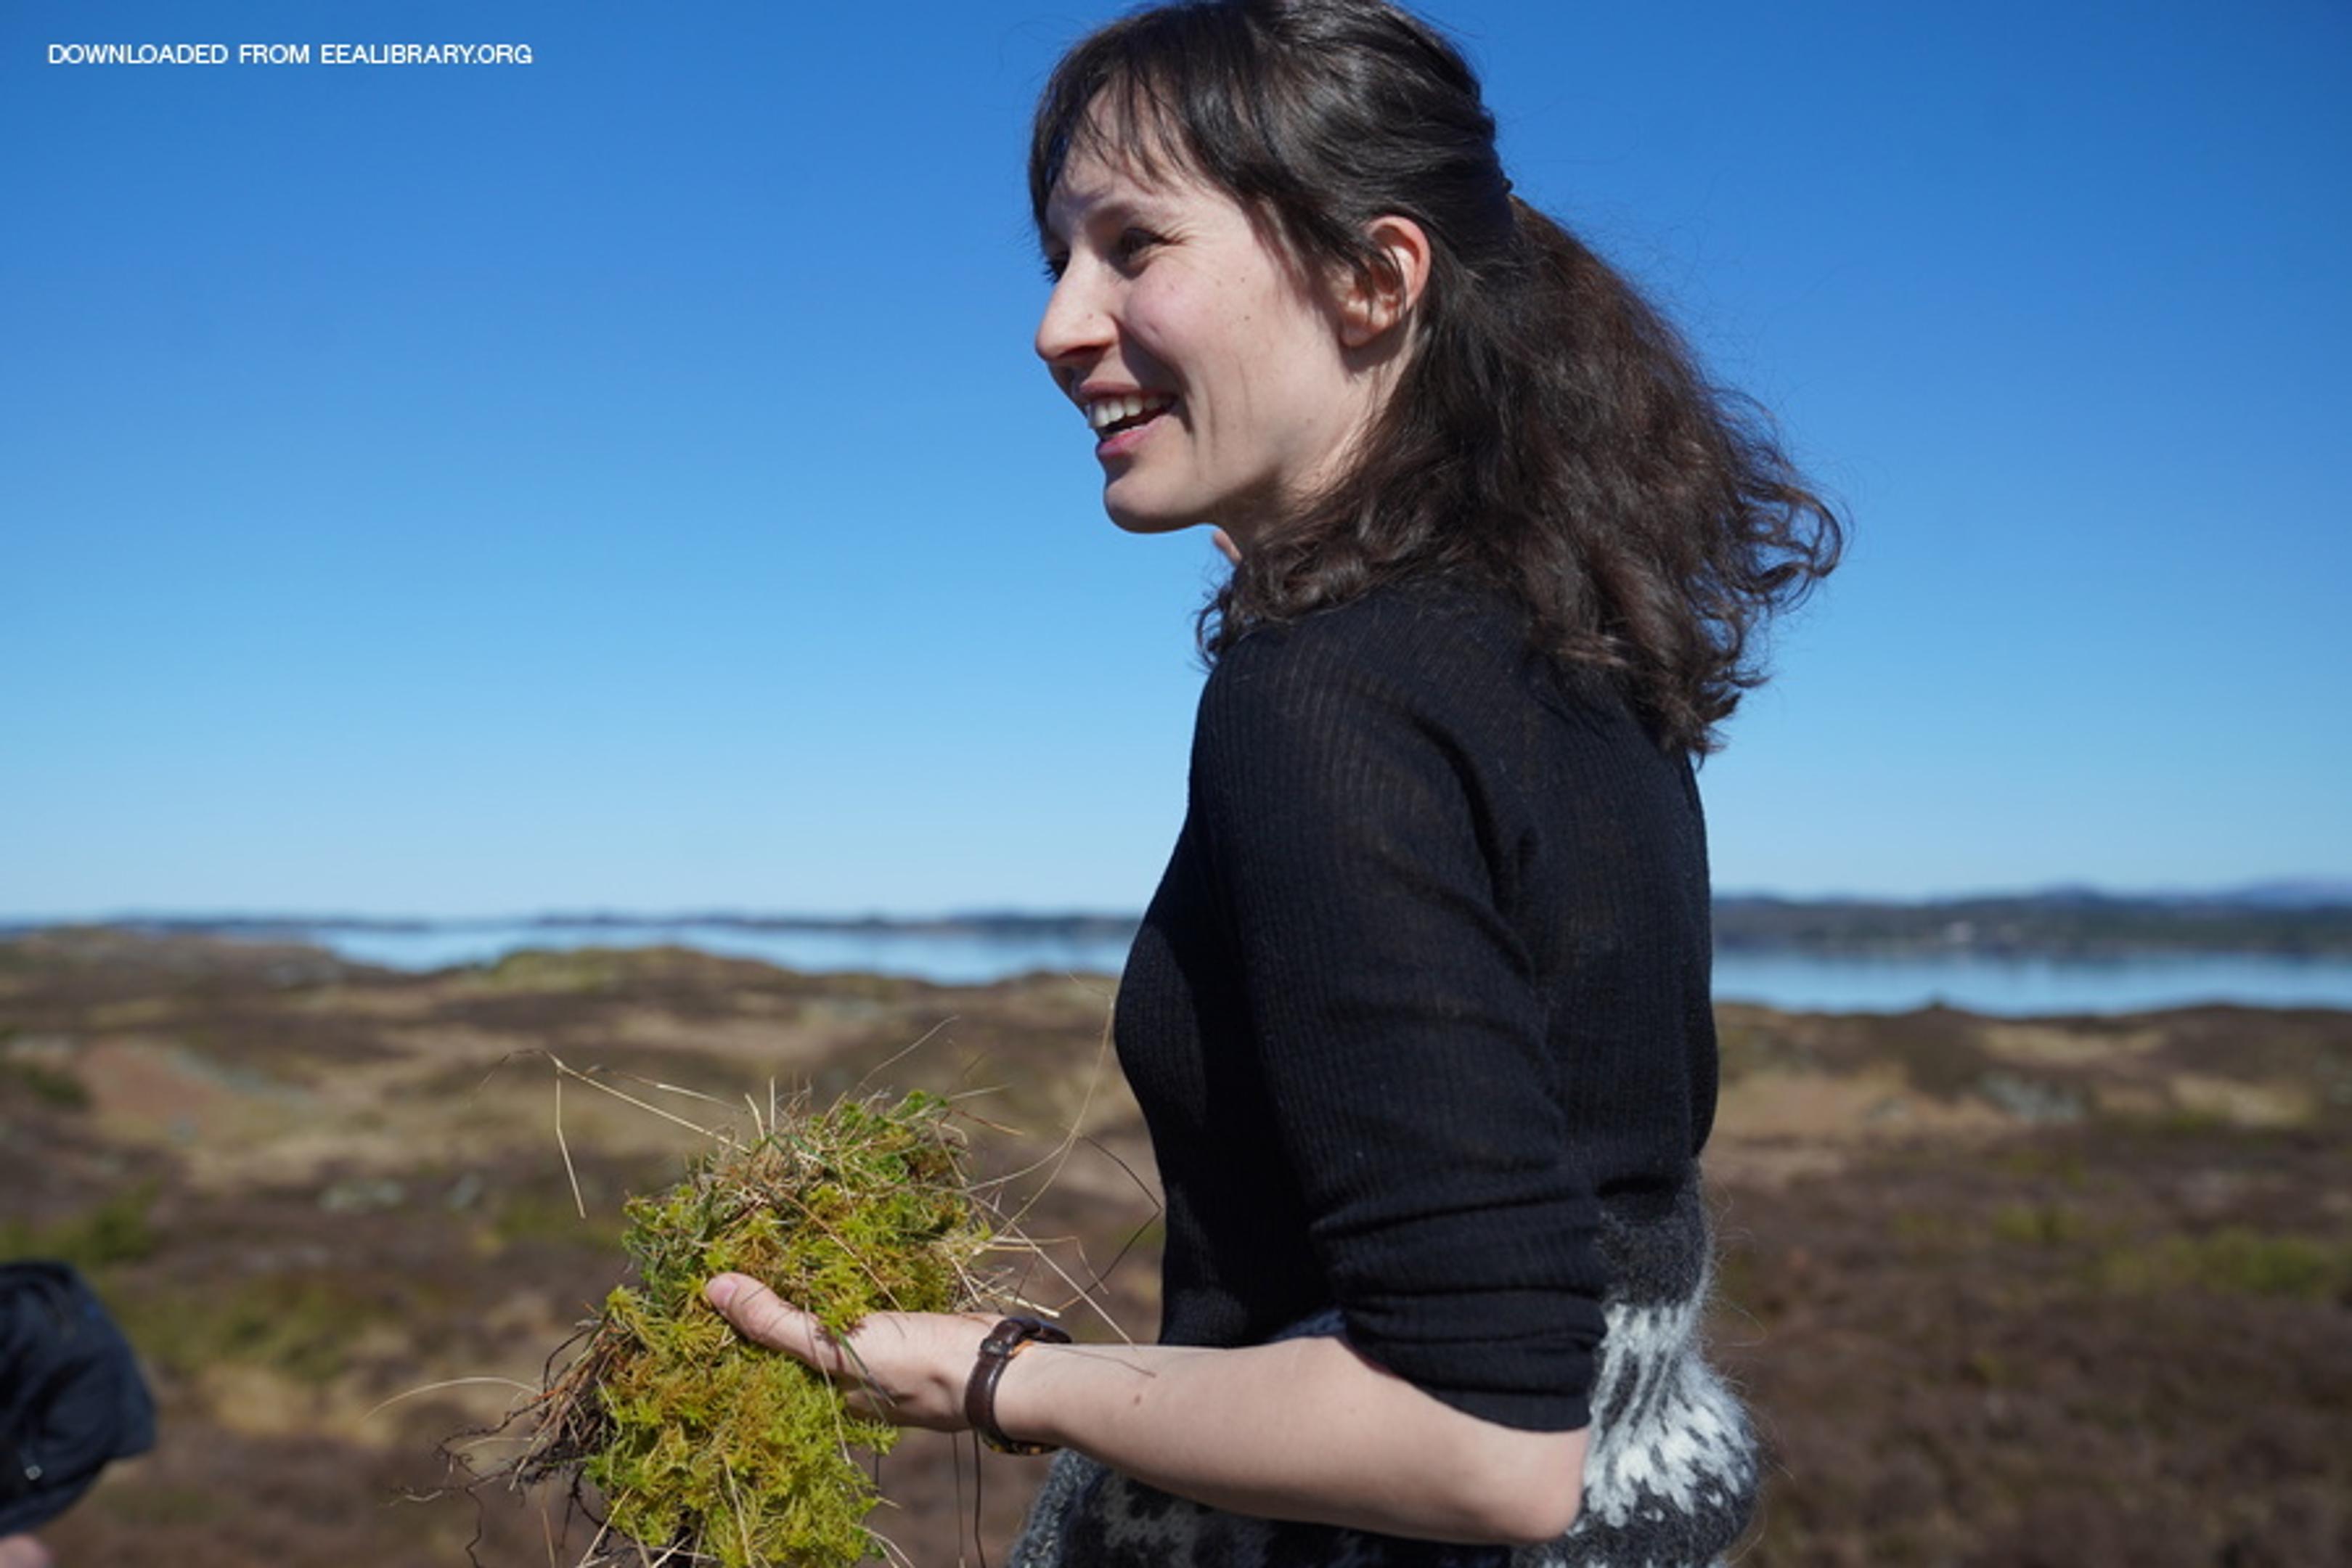 Researcher Siri Haugum from the Nordhordland UNESCO Biosphere during a guided tour